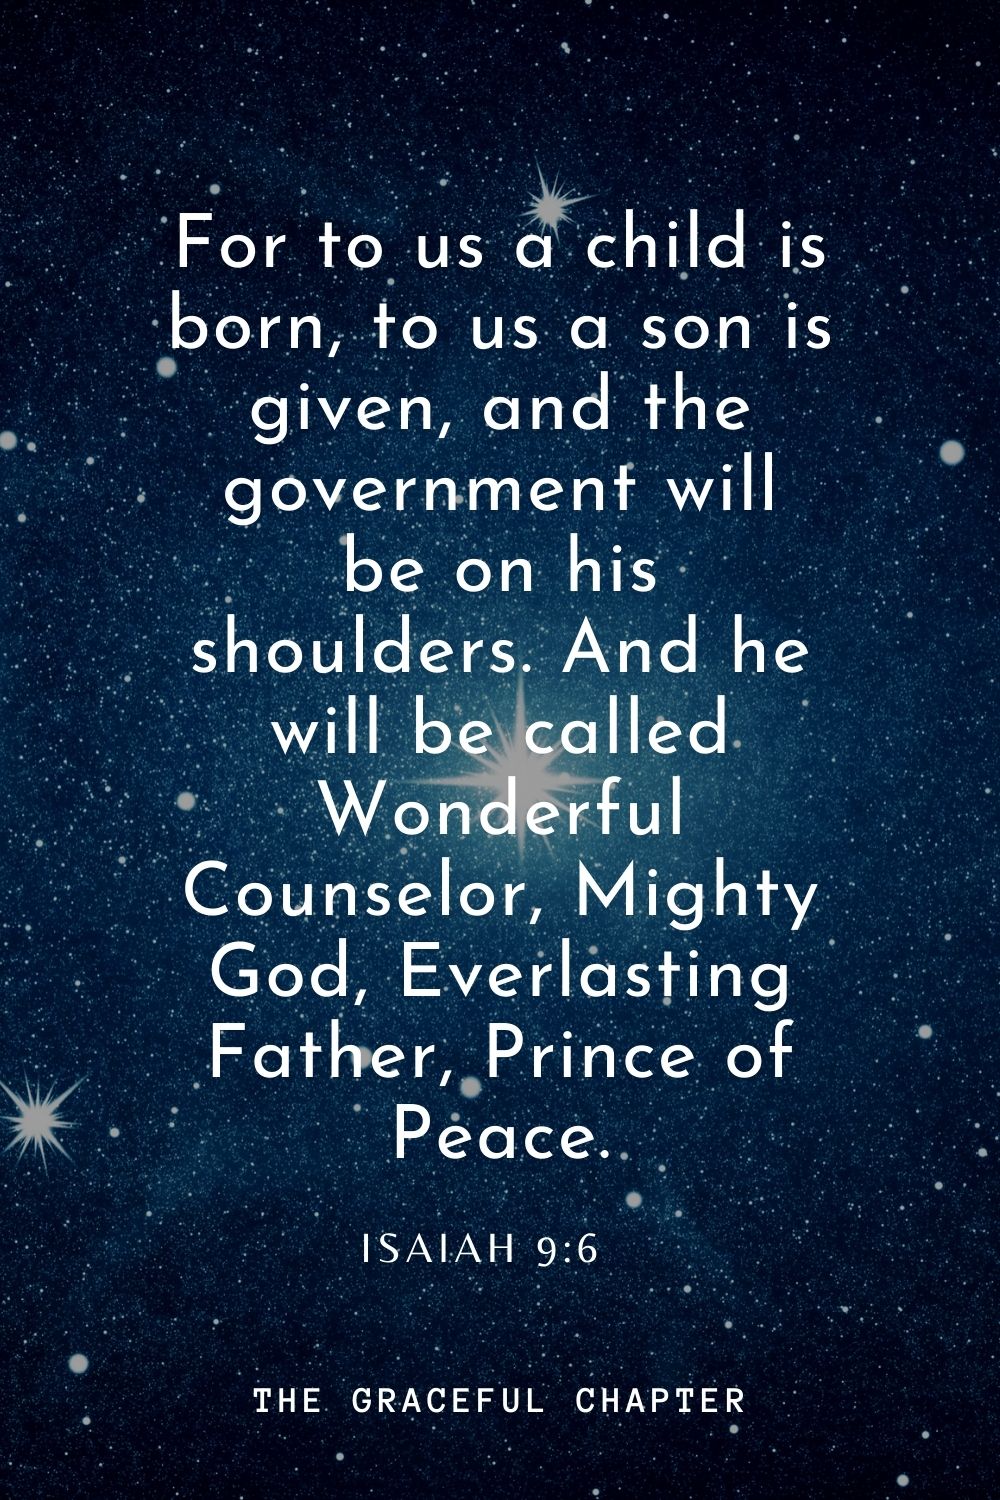 For to us a child is born, to us a son is given, and the government will be on his shoulders. And he will be called Wonderful Counselor, Mighty God, Everlasting Father, Prince of Peace. Isaiah 9:6